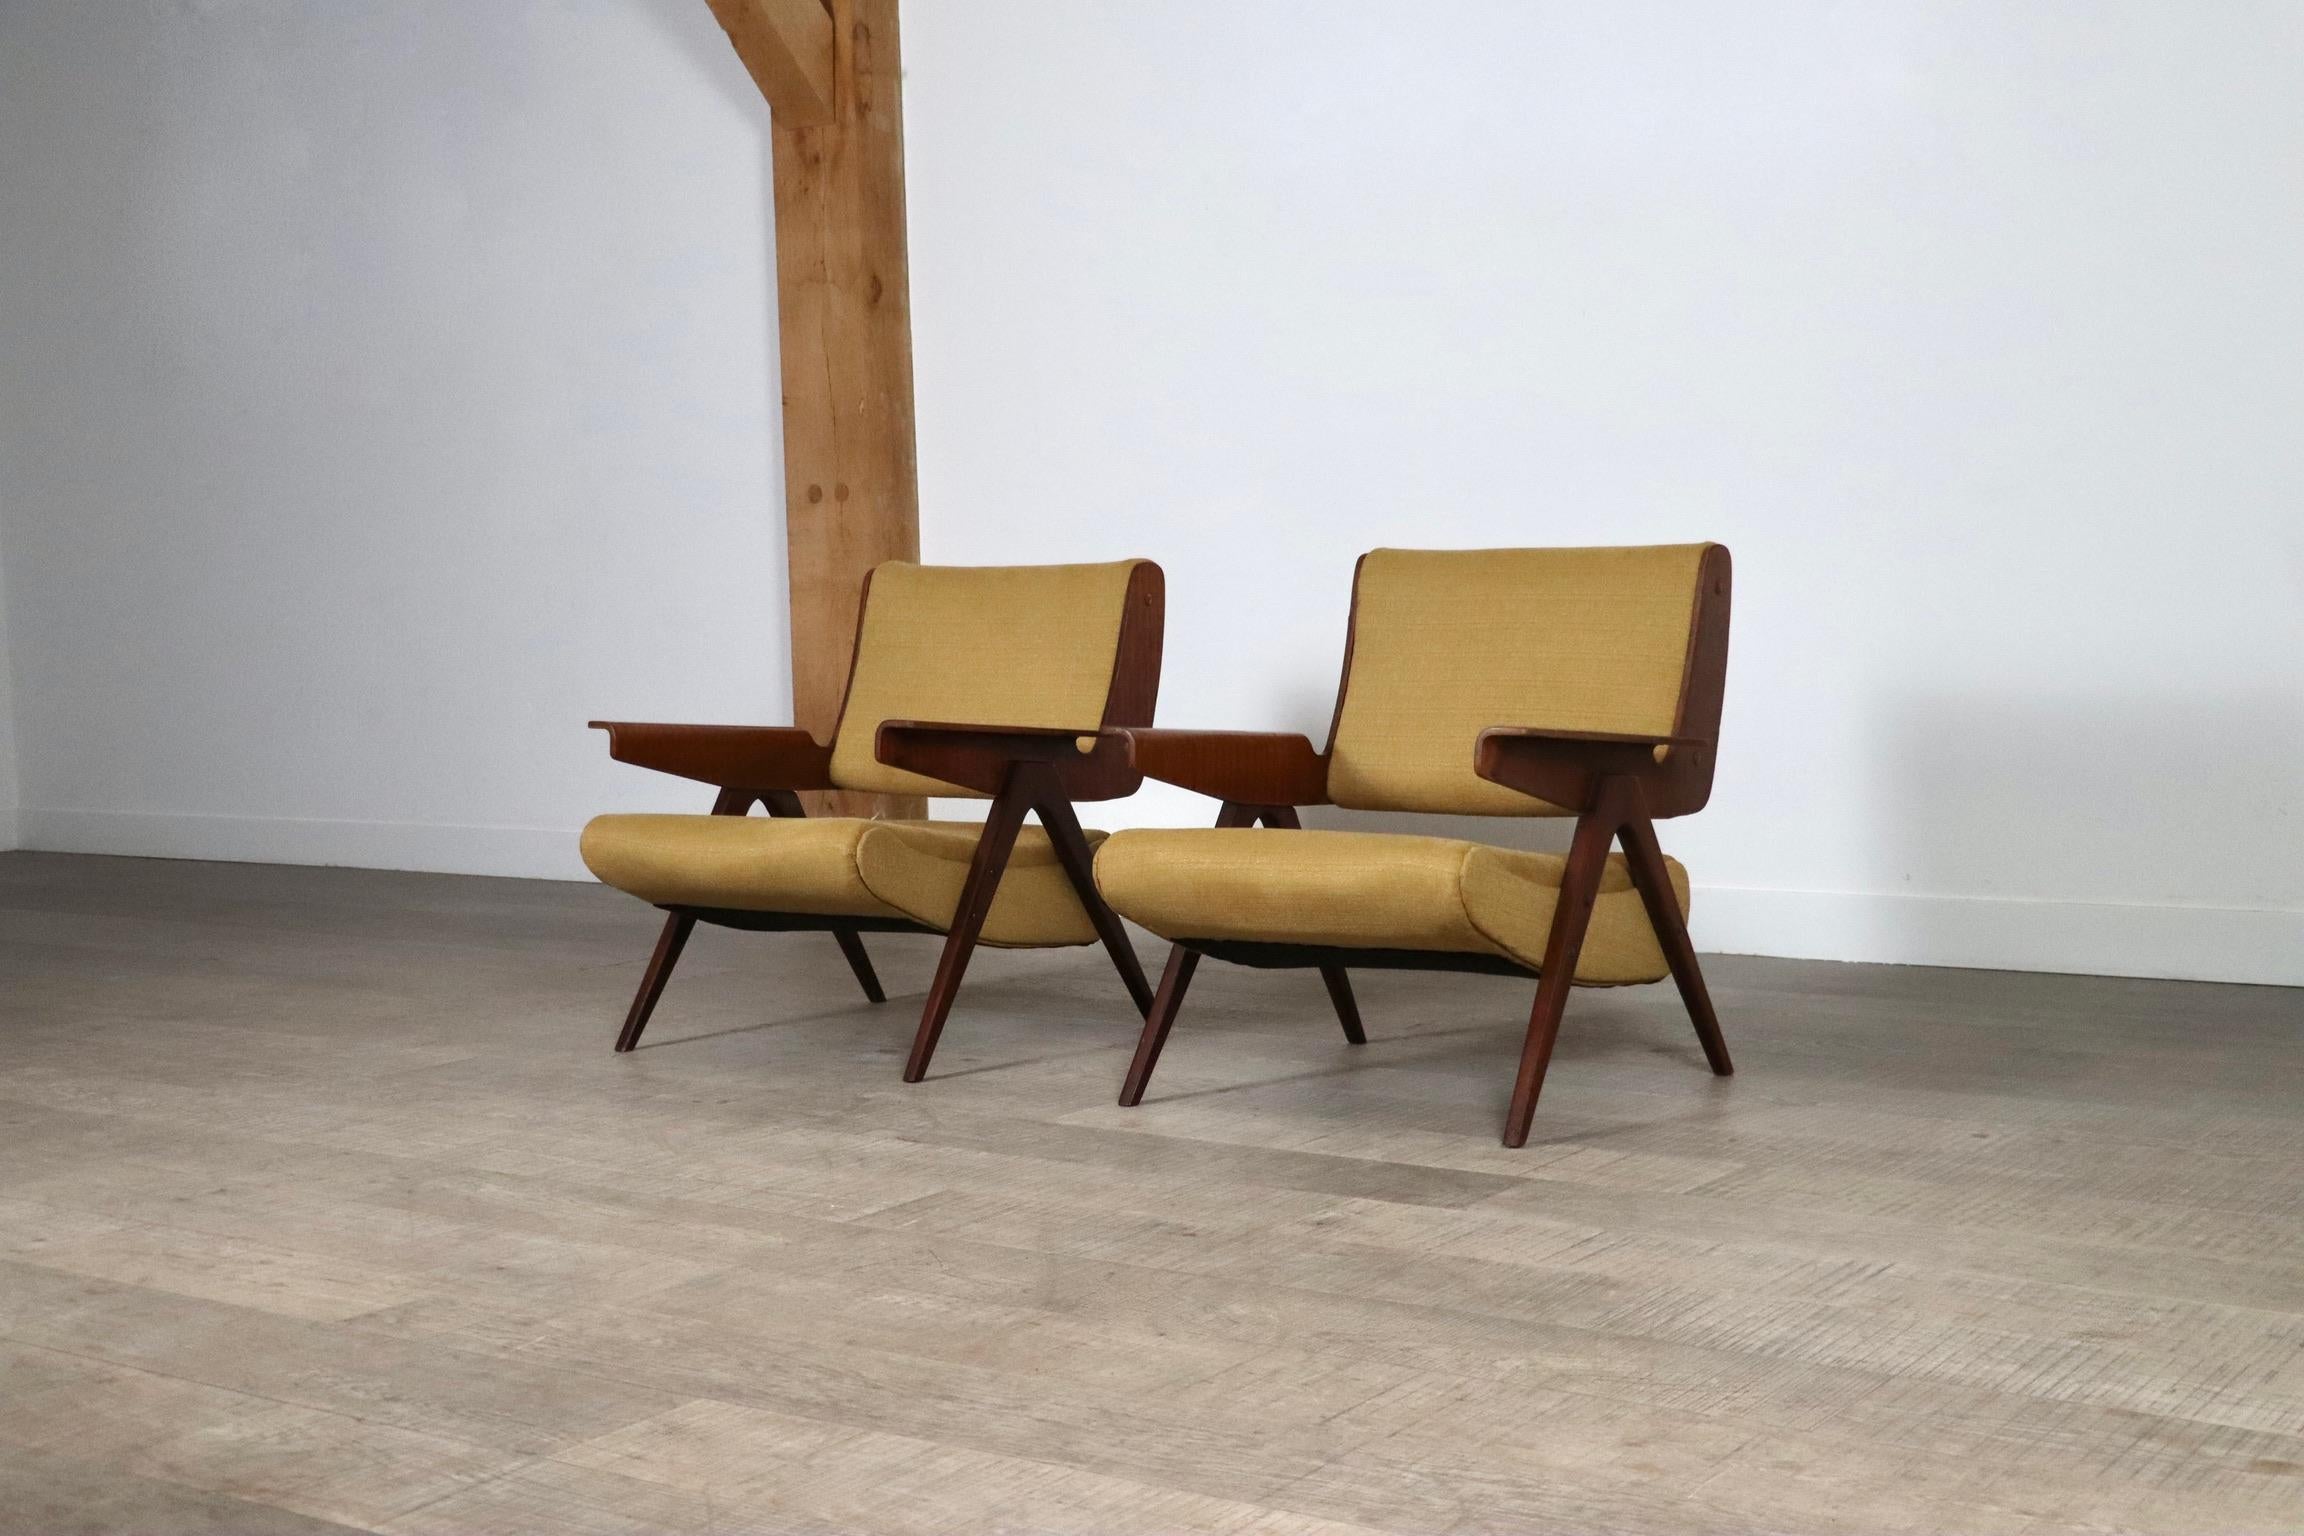 Incredible pair of model 831 chairs by Gianfranco Frattini for Cassina, 1950s. These model chairs are exceptionally rare. The fantastic design by renowned Italian designer Gianfranco Frattini shows its iconic features in the angular mahogany wooden